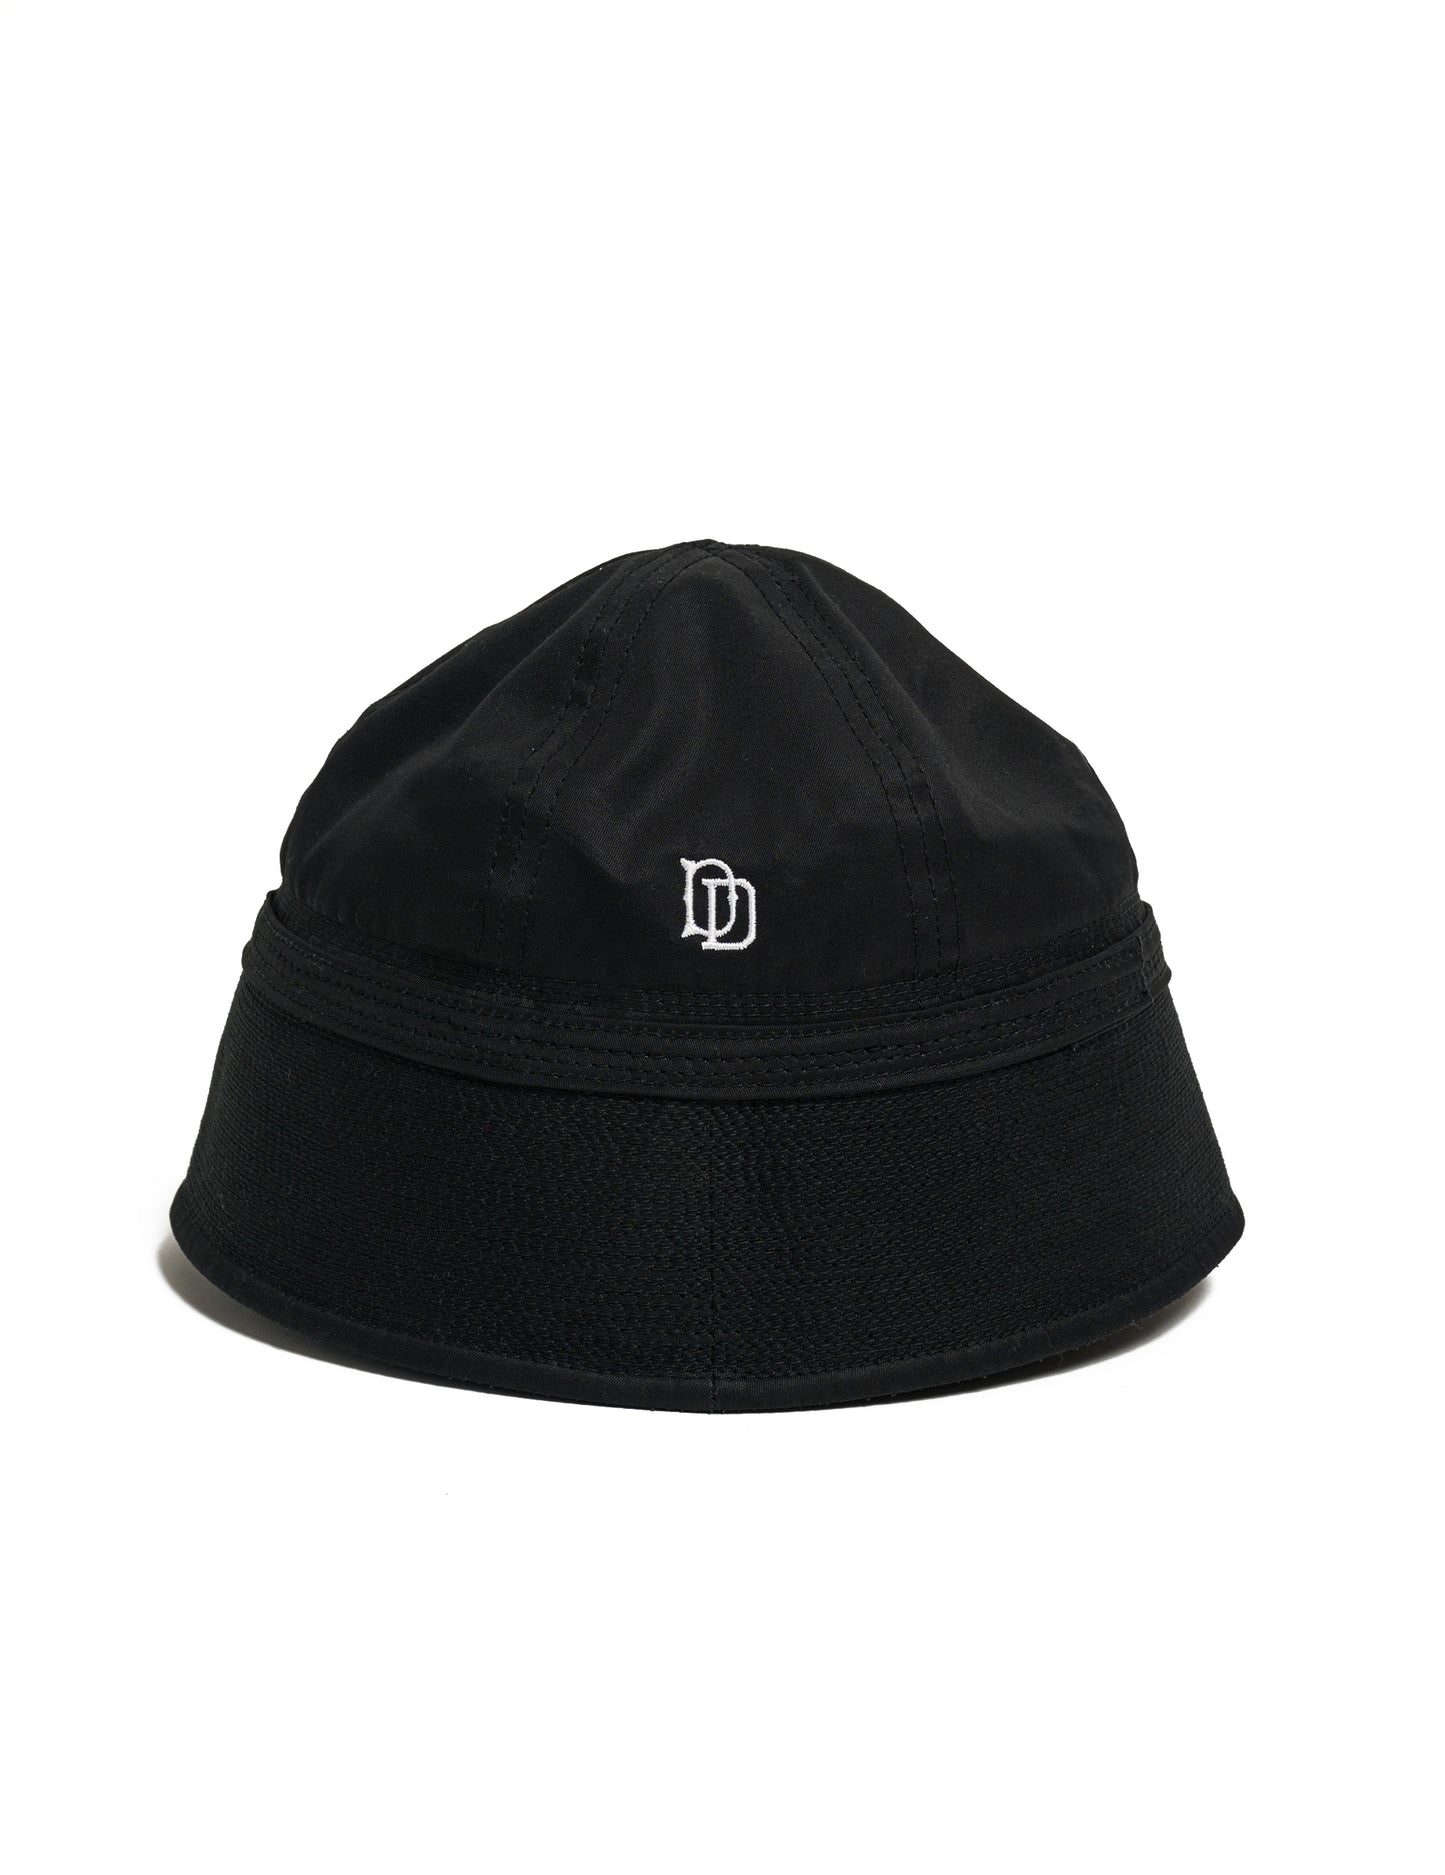 THE H.W.DOG x DELUXE HAT